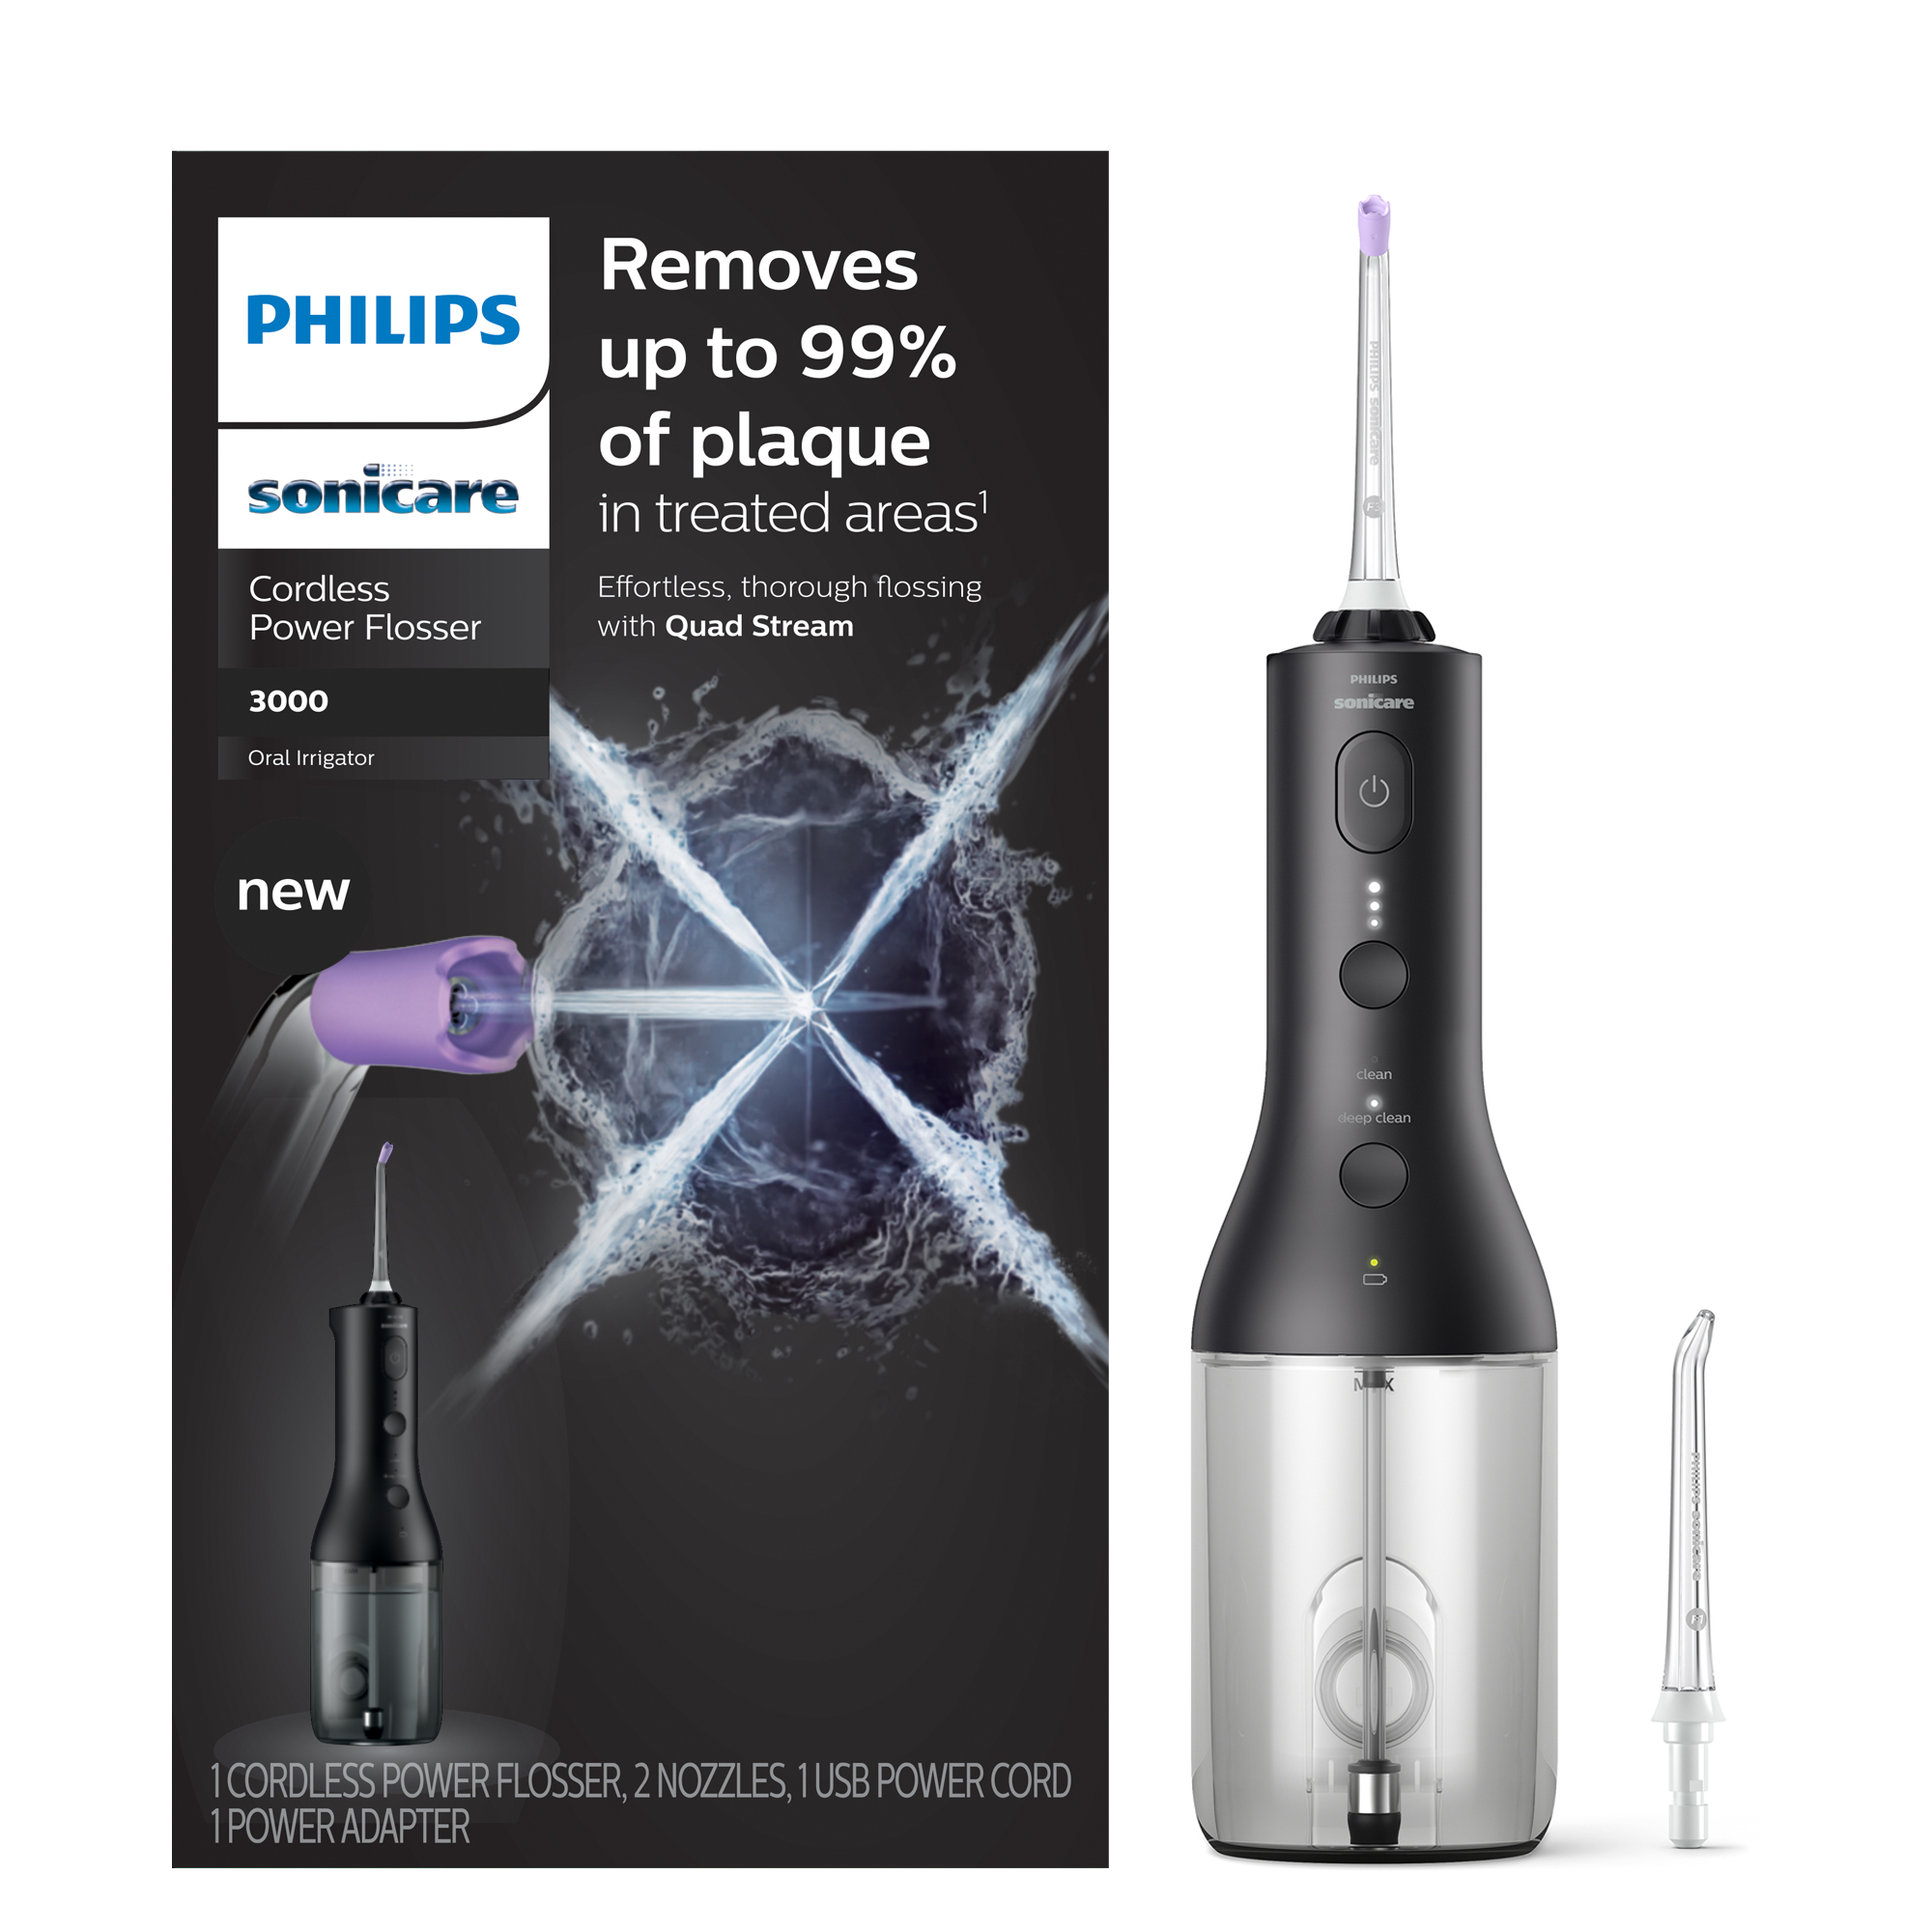 Philips Sonicare Cordless Electric Power Flosser 3000 - Black - image 1 of 23